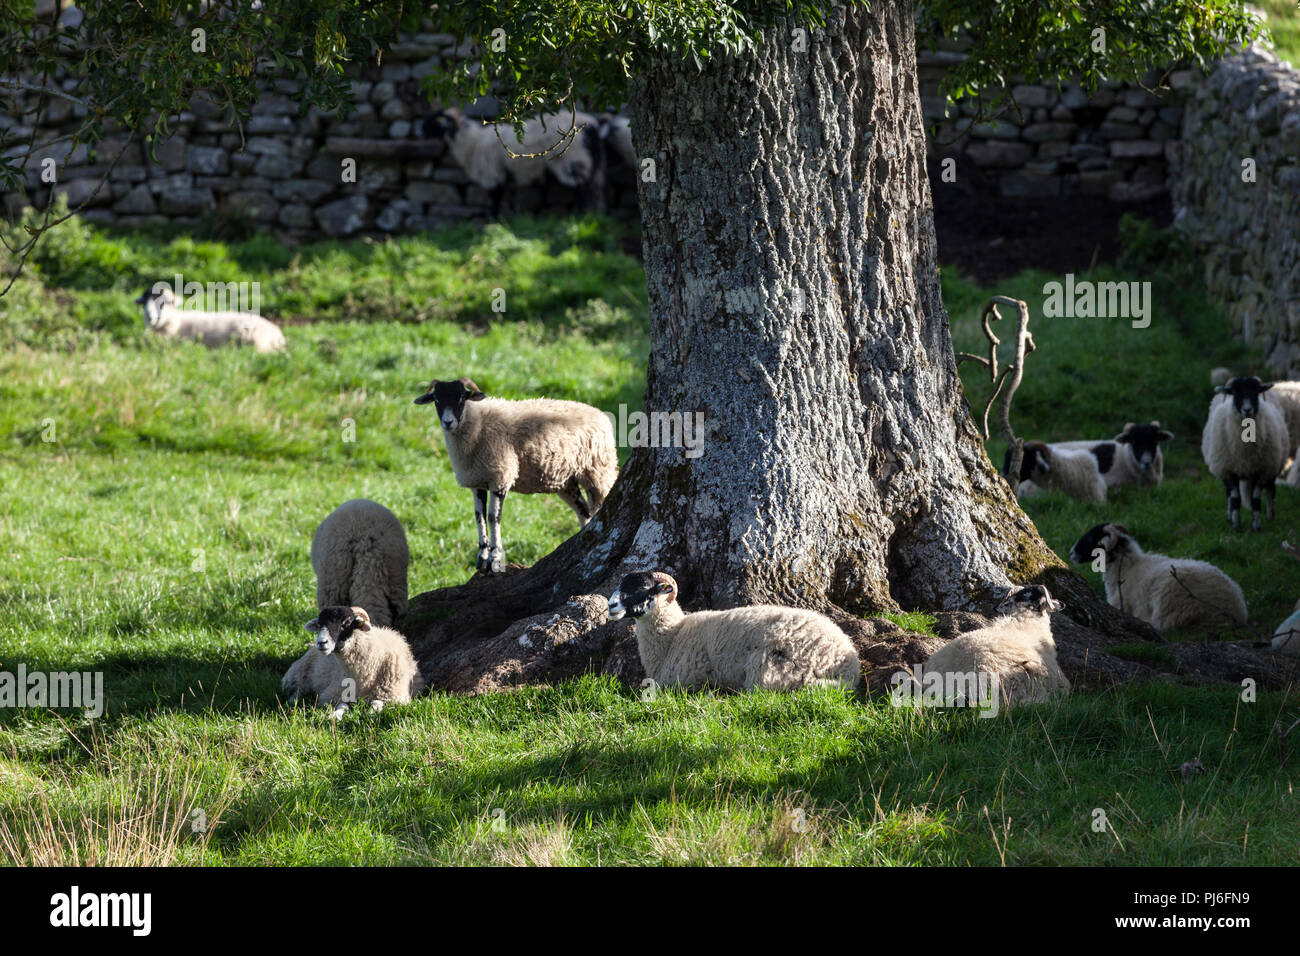 Upper Teesdale, County Durham. Wednesday 5th September 2018. UK Weather.  After a bright but chilly start to the day in Upper Teesdale these sheep soon had to seek out some shade as temperatures rose quickly in the autumnal sunshine. David Forster/Alamy Live News Stock Photo